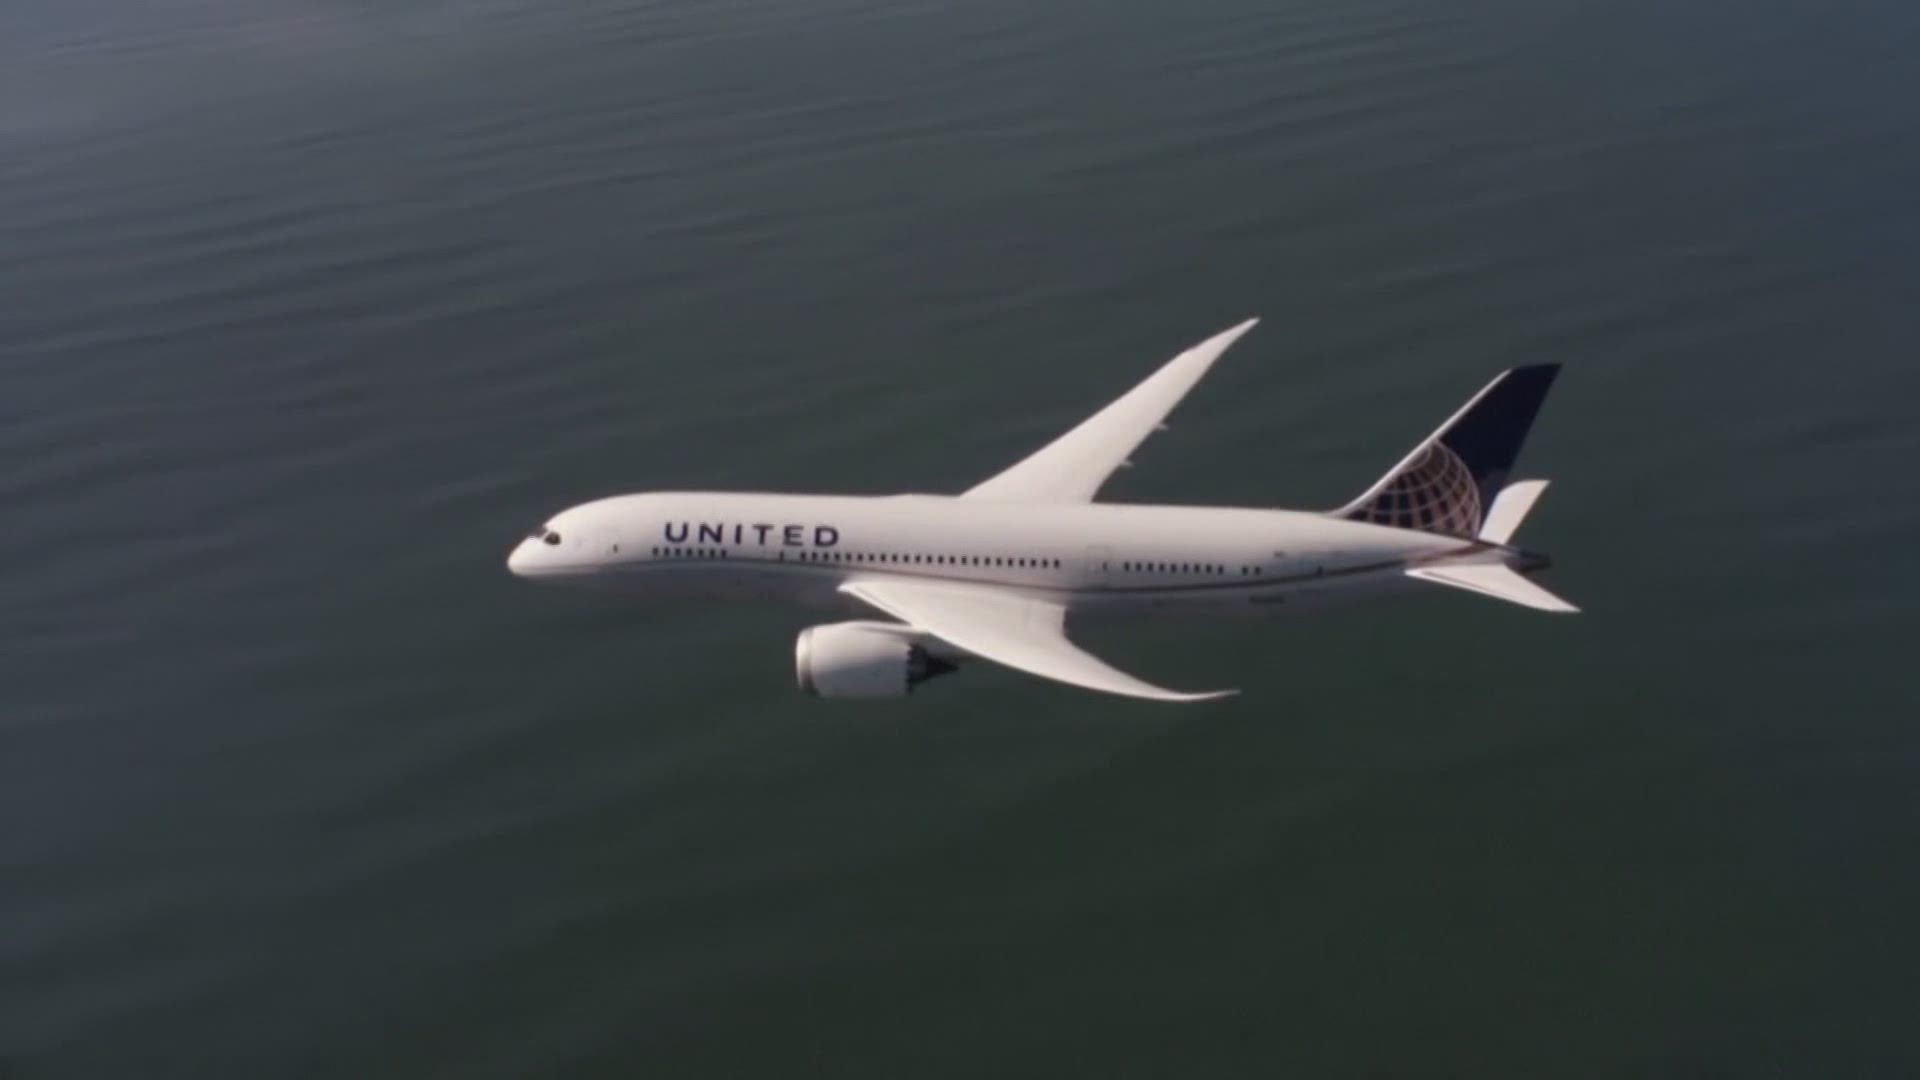 The first of those new jets took off from Bush Airport Friday. United's new 737 MAX 8's will be state-of-the-art aircraft with "all the bells and whistles."